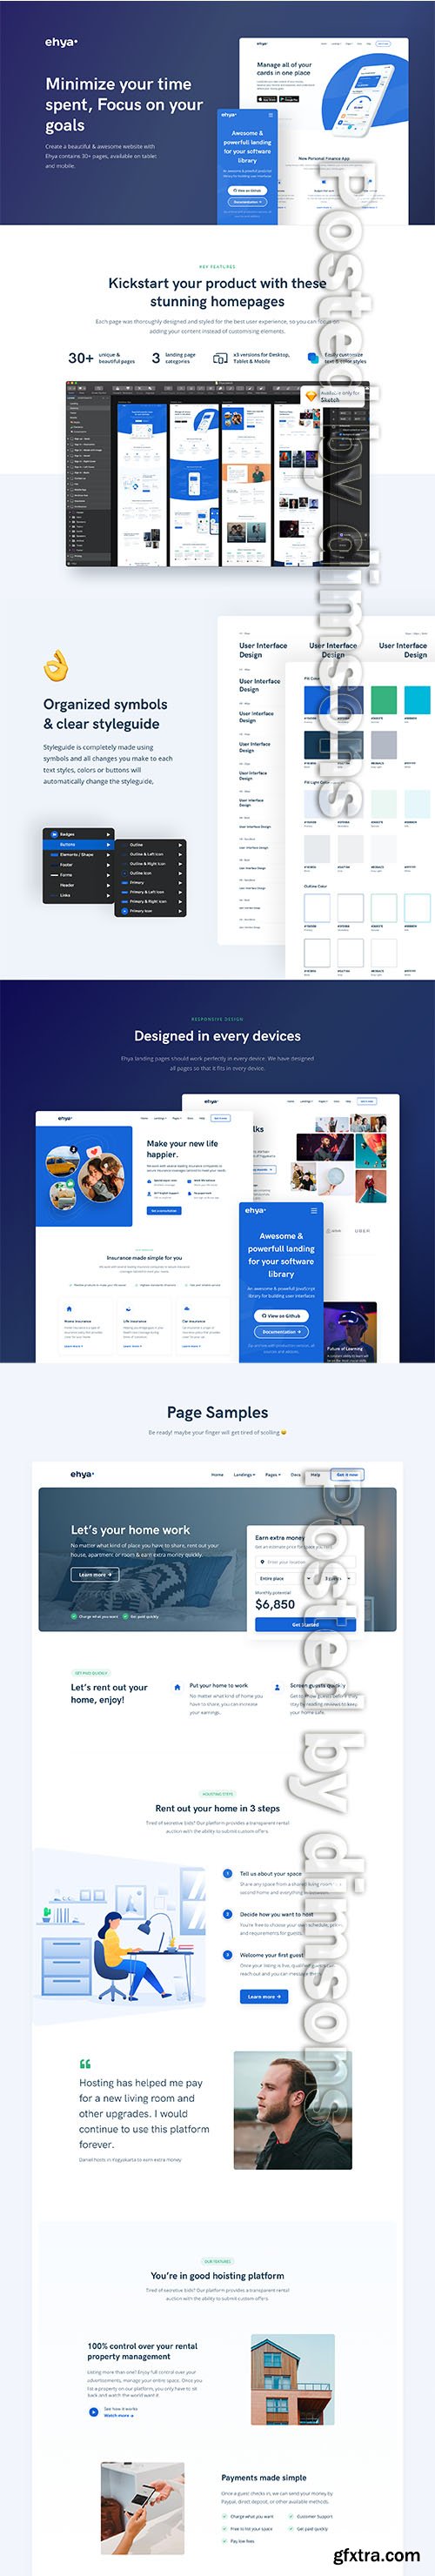 Ehya: Landing Page Design Template